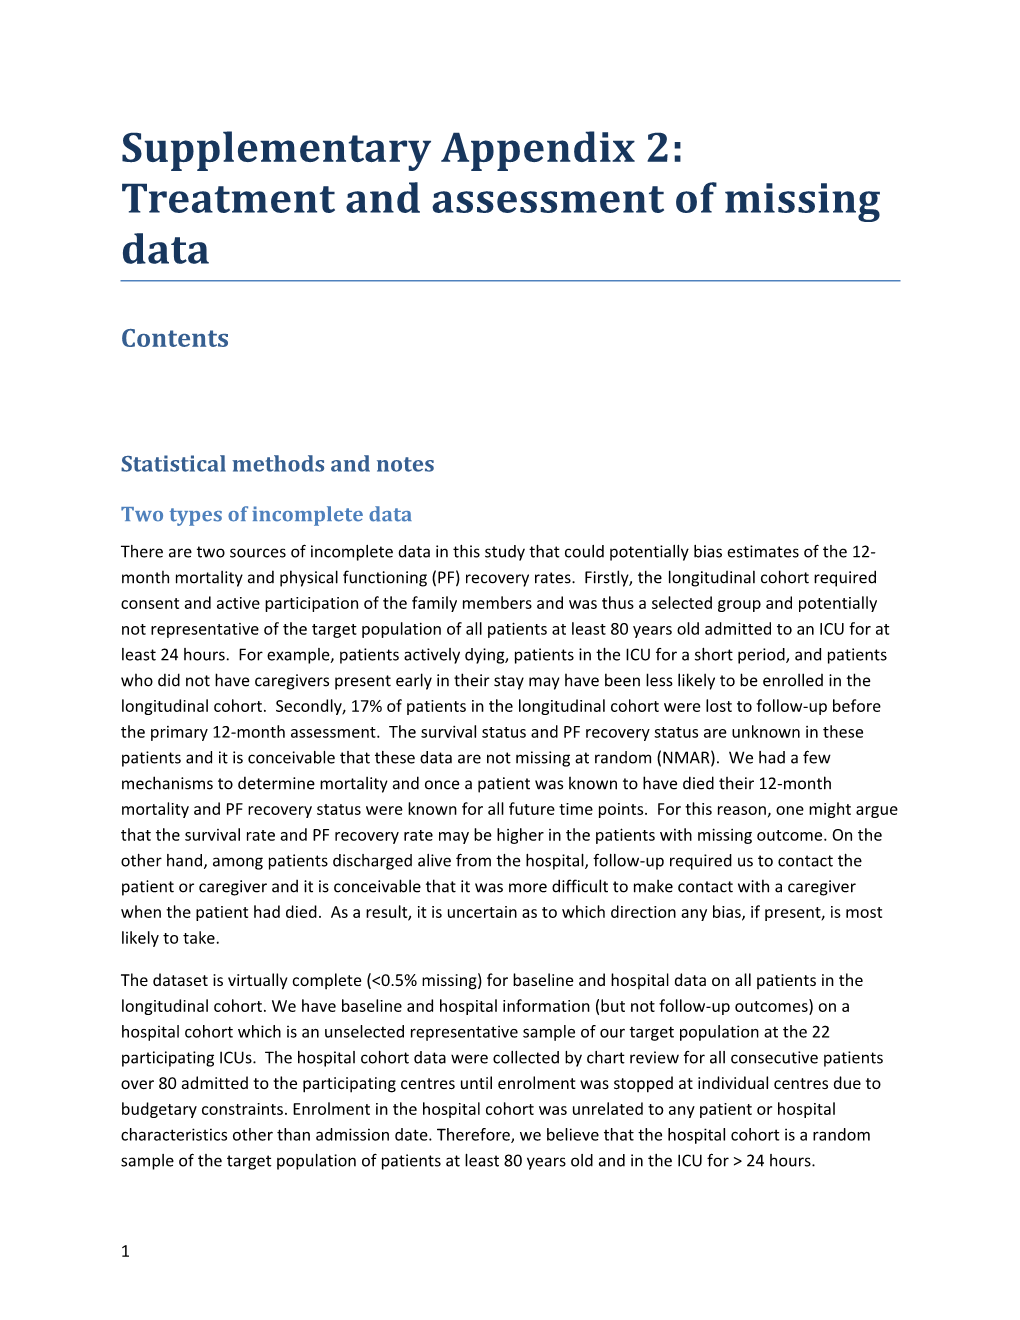 Supplementary Appendix 2: Treatment and Assessment of Missing Data